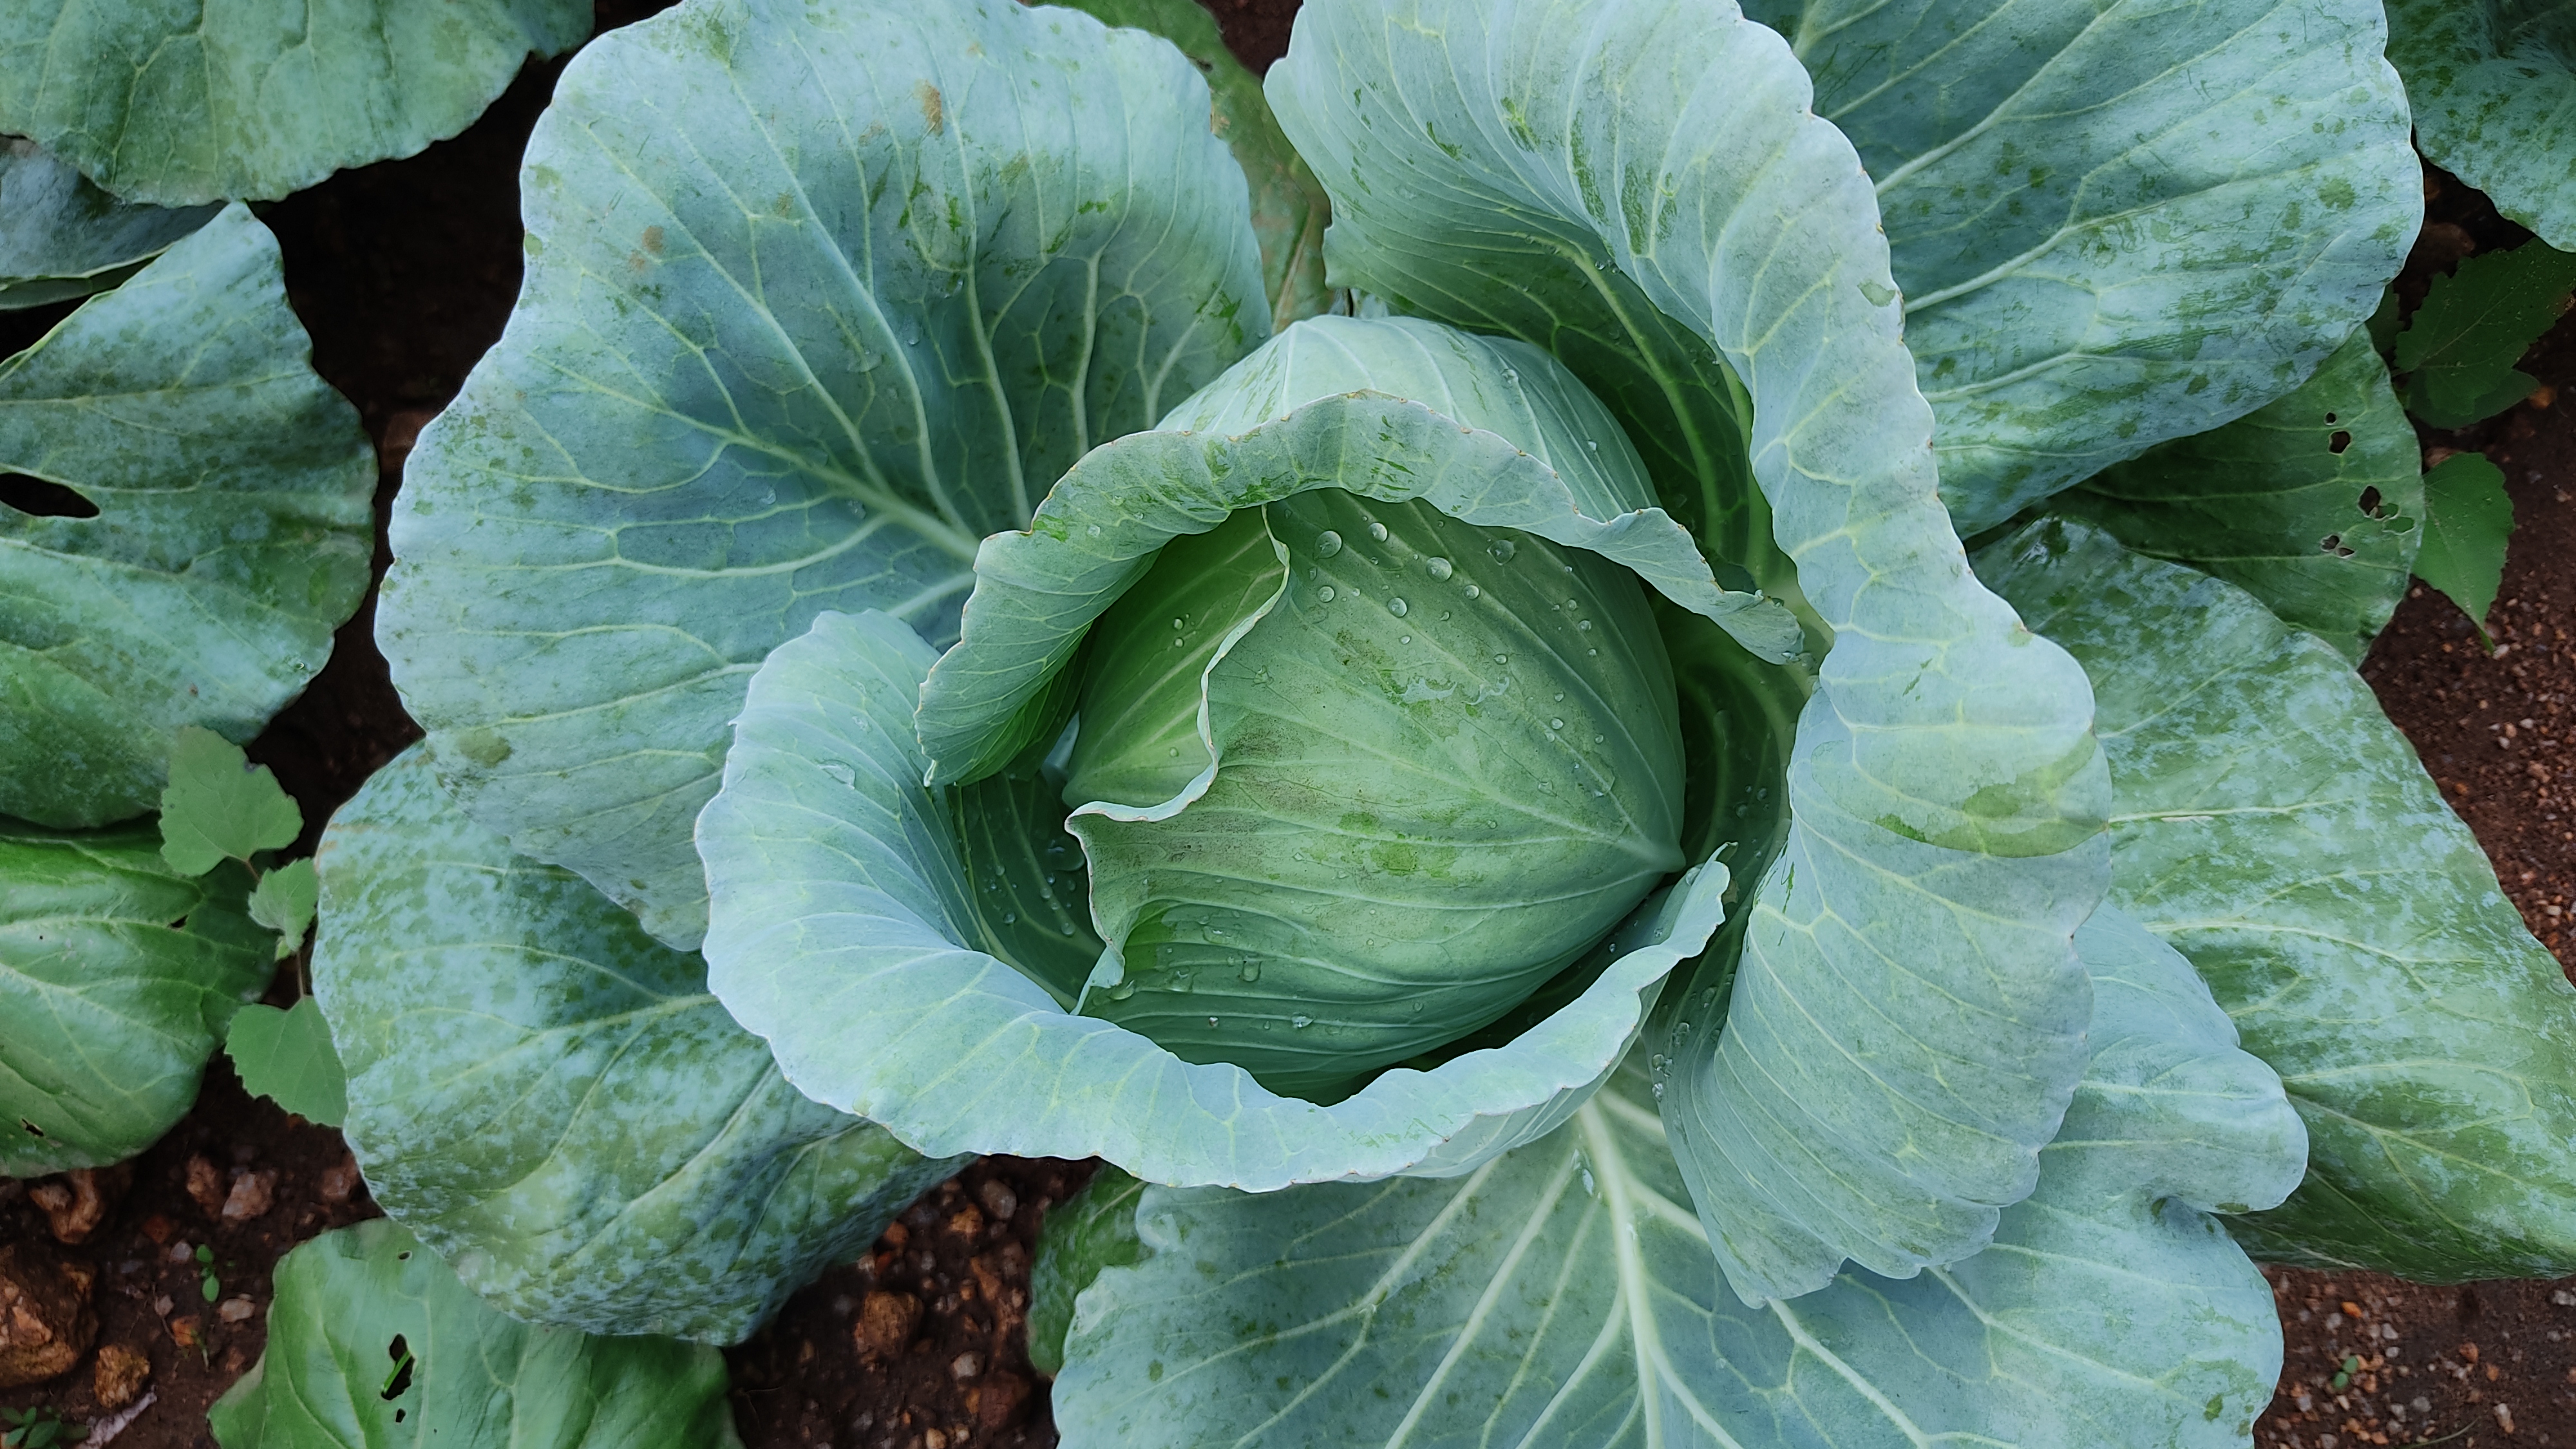 Growing cabbages for higher nutrition and income -  Hatinada village, West Bengal